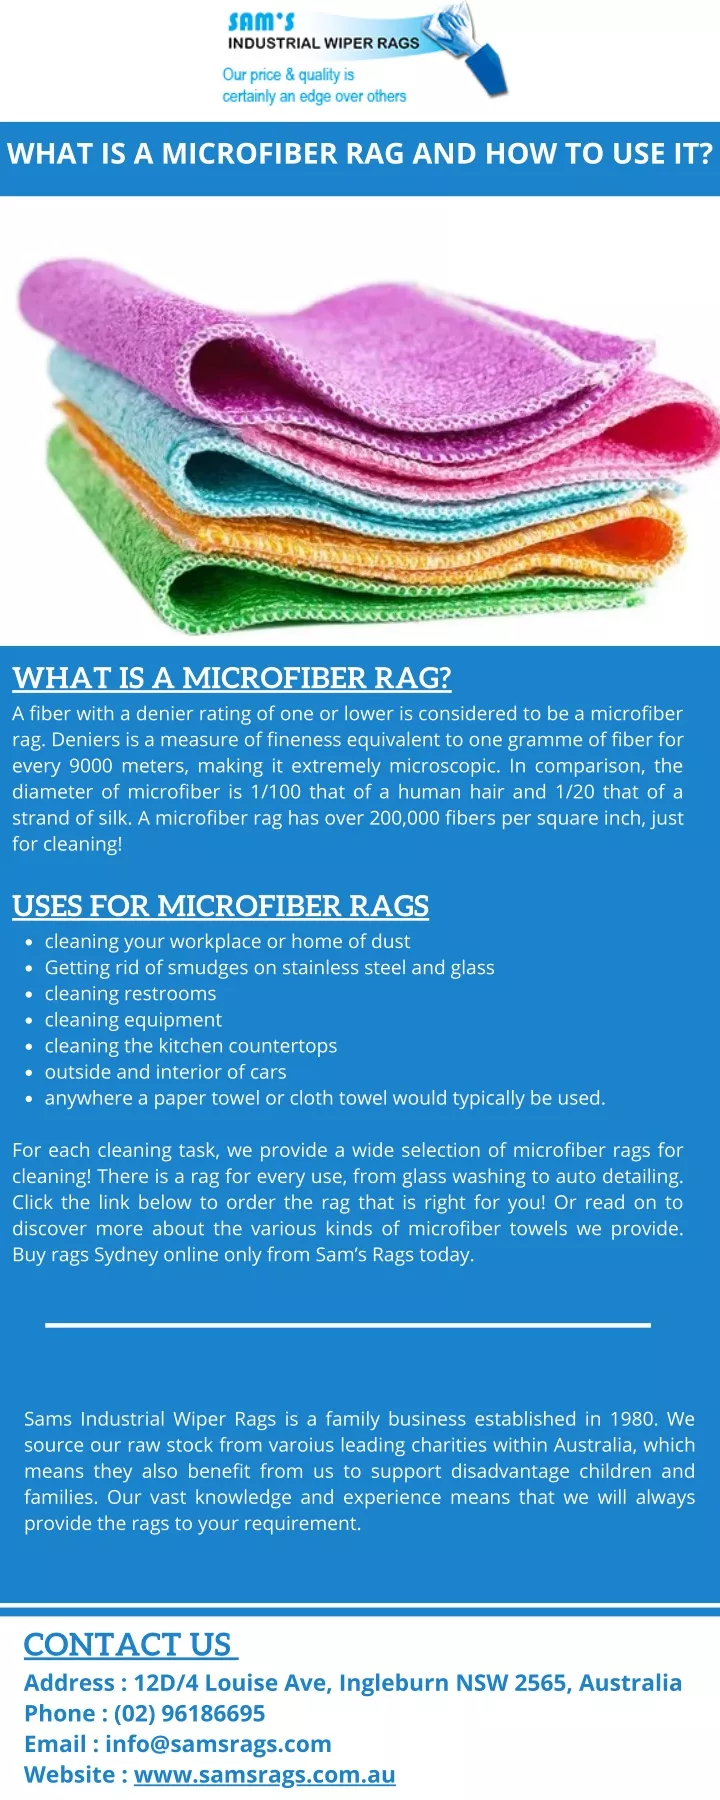 what is a microfiber rag and how to use it